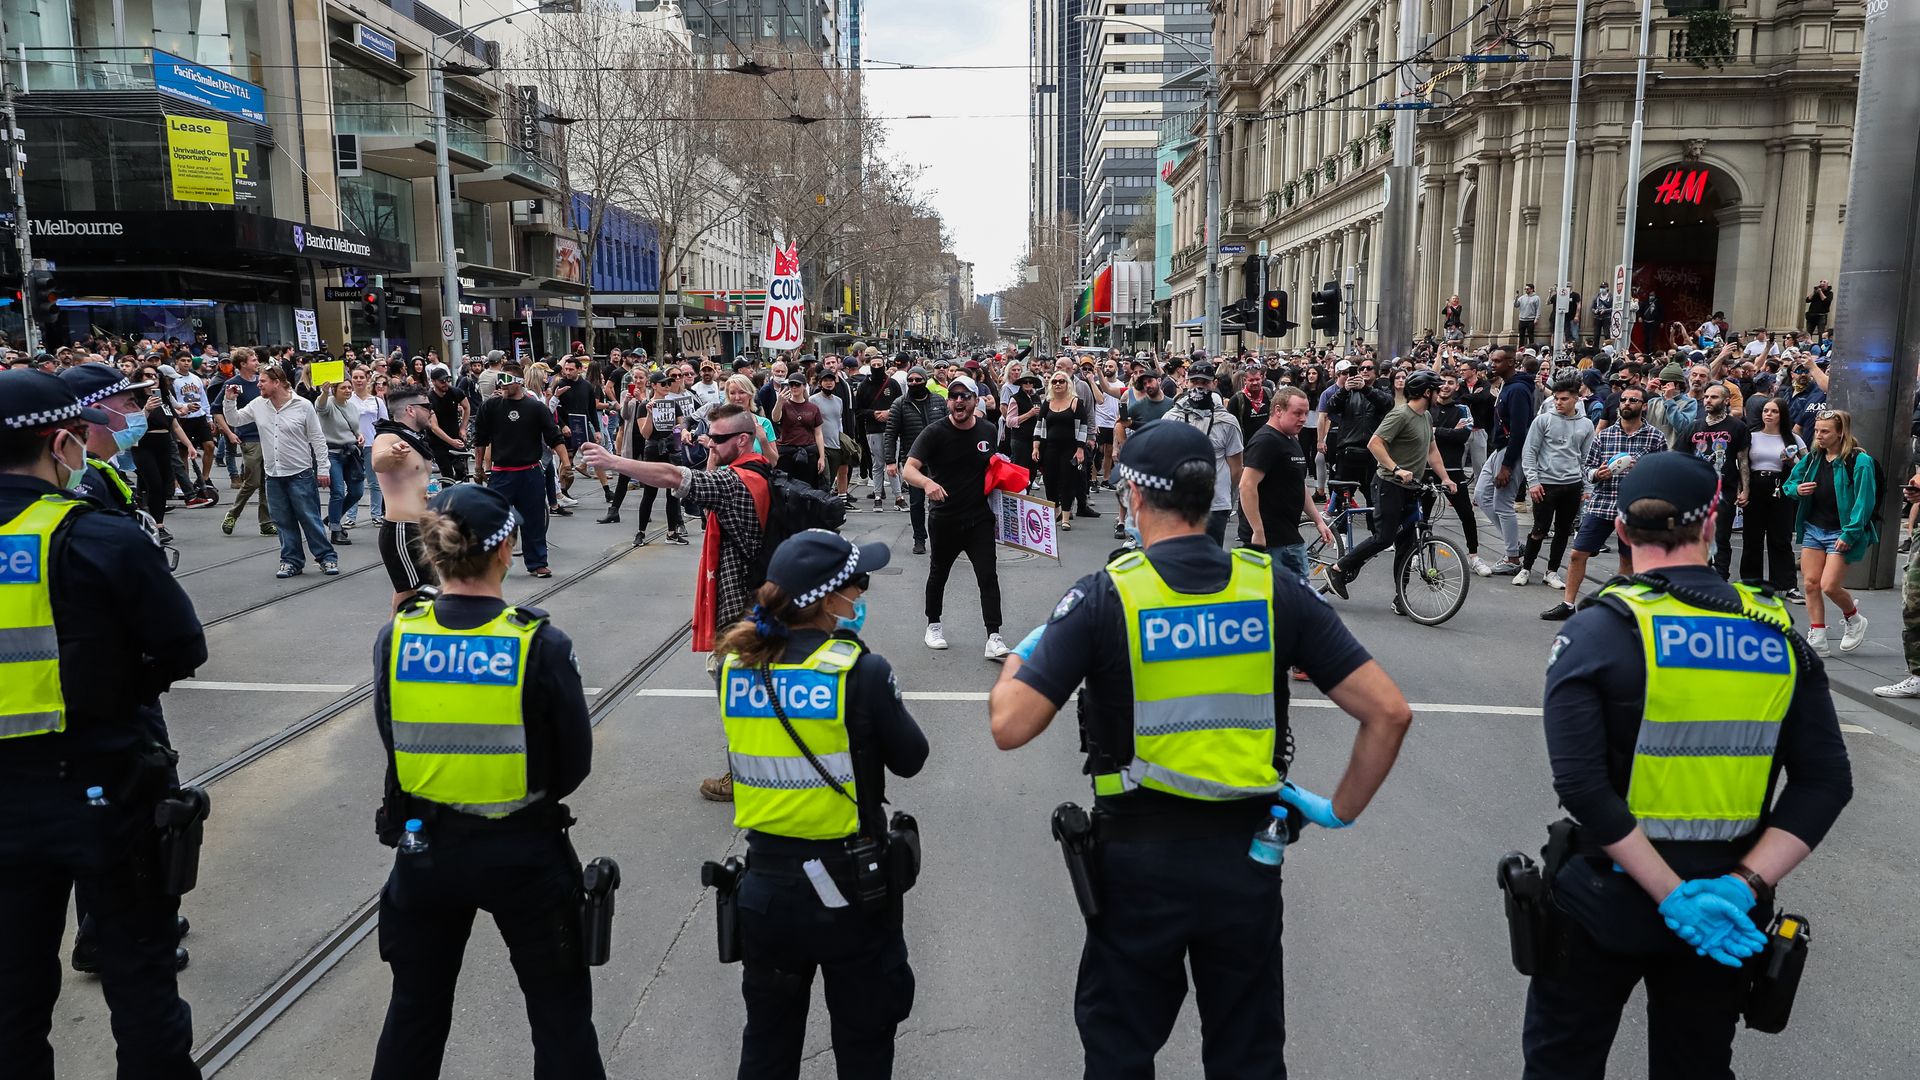 Picture of protesters in Australia, a line of police stands in front of the camera